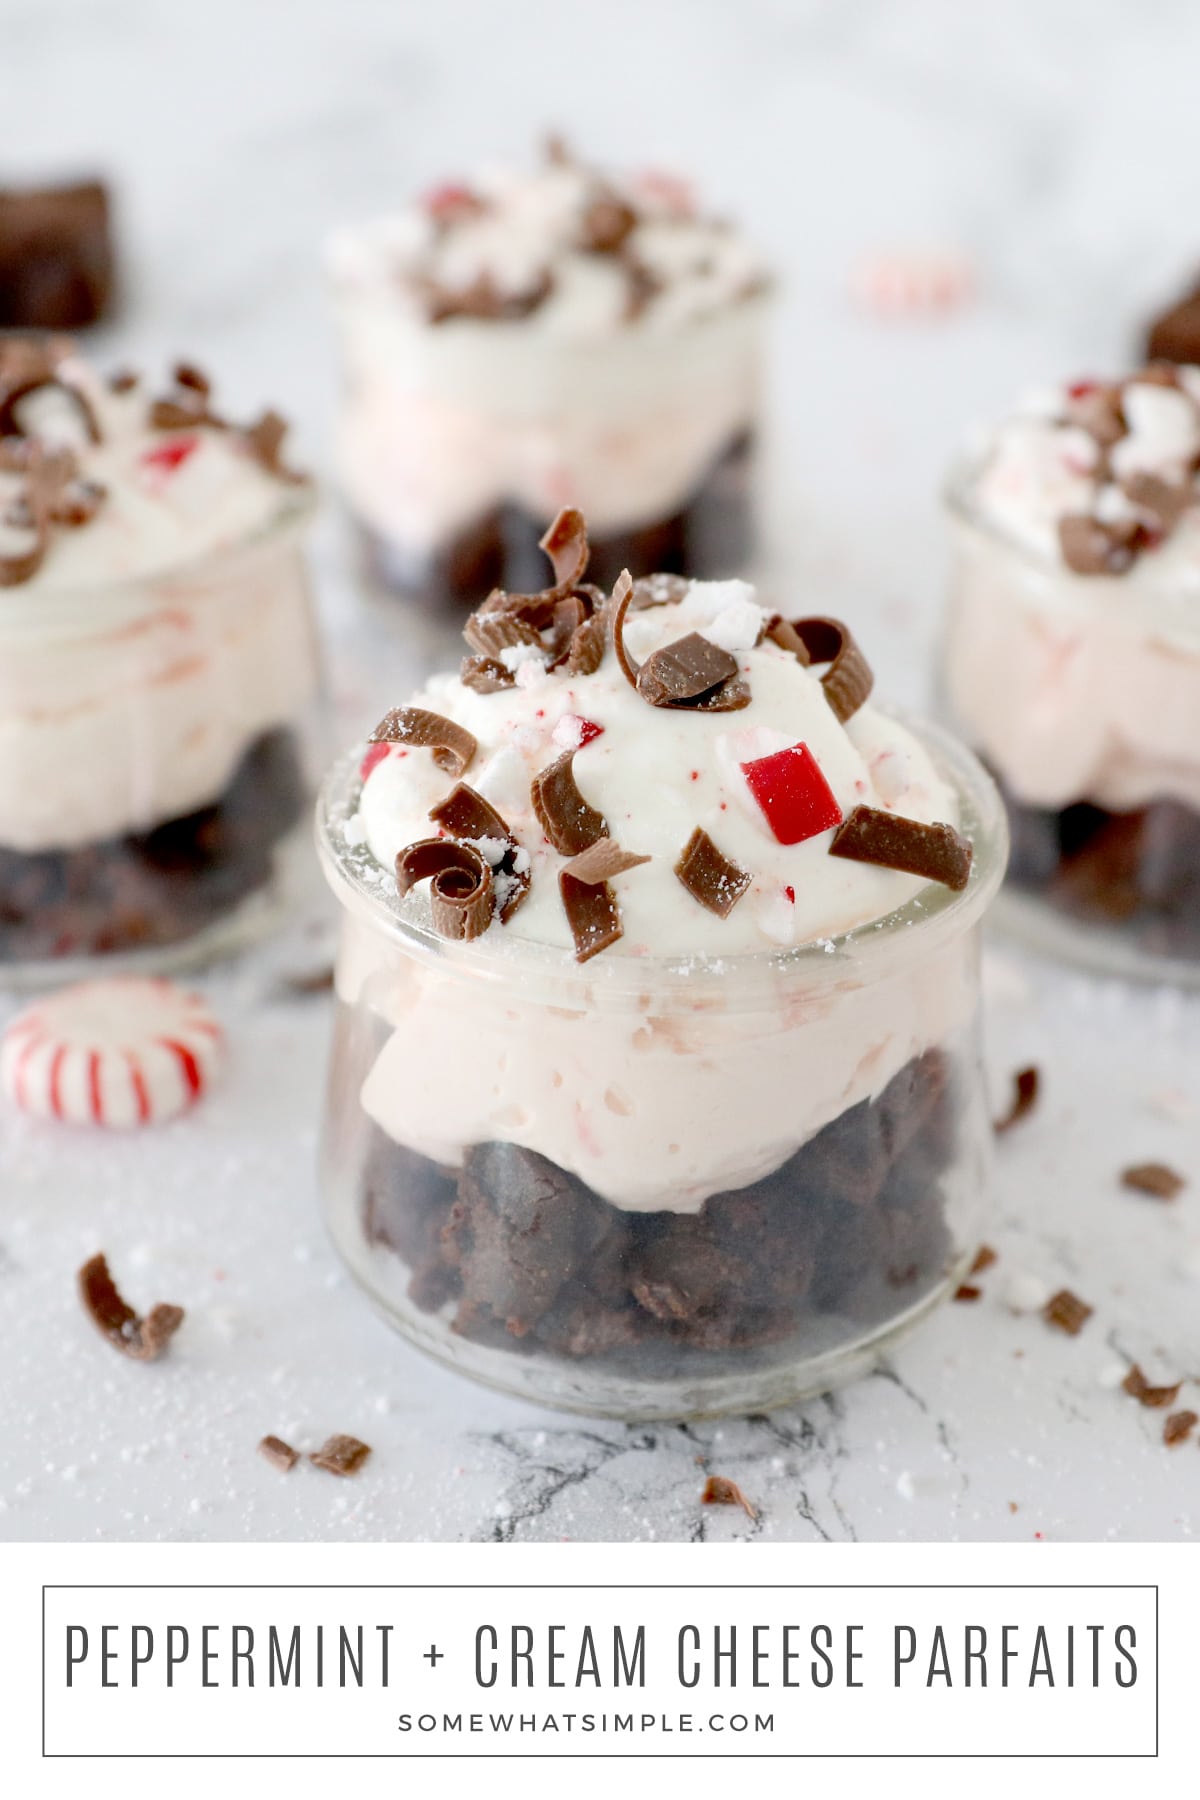 This simple peppermint parfait recipe is made with brownies, whipped cream, and a homemade cheesecake layer filled with crushed peppermint candies. These tasty little treats can be ready for your holiday festivities in just a few minutes! via @somewhatsimple